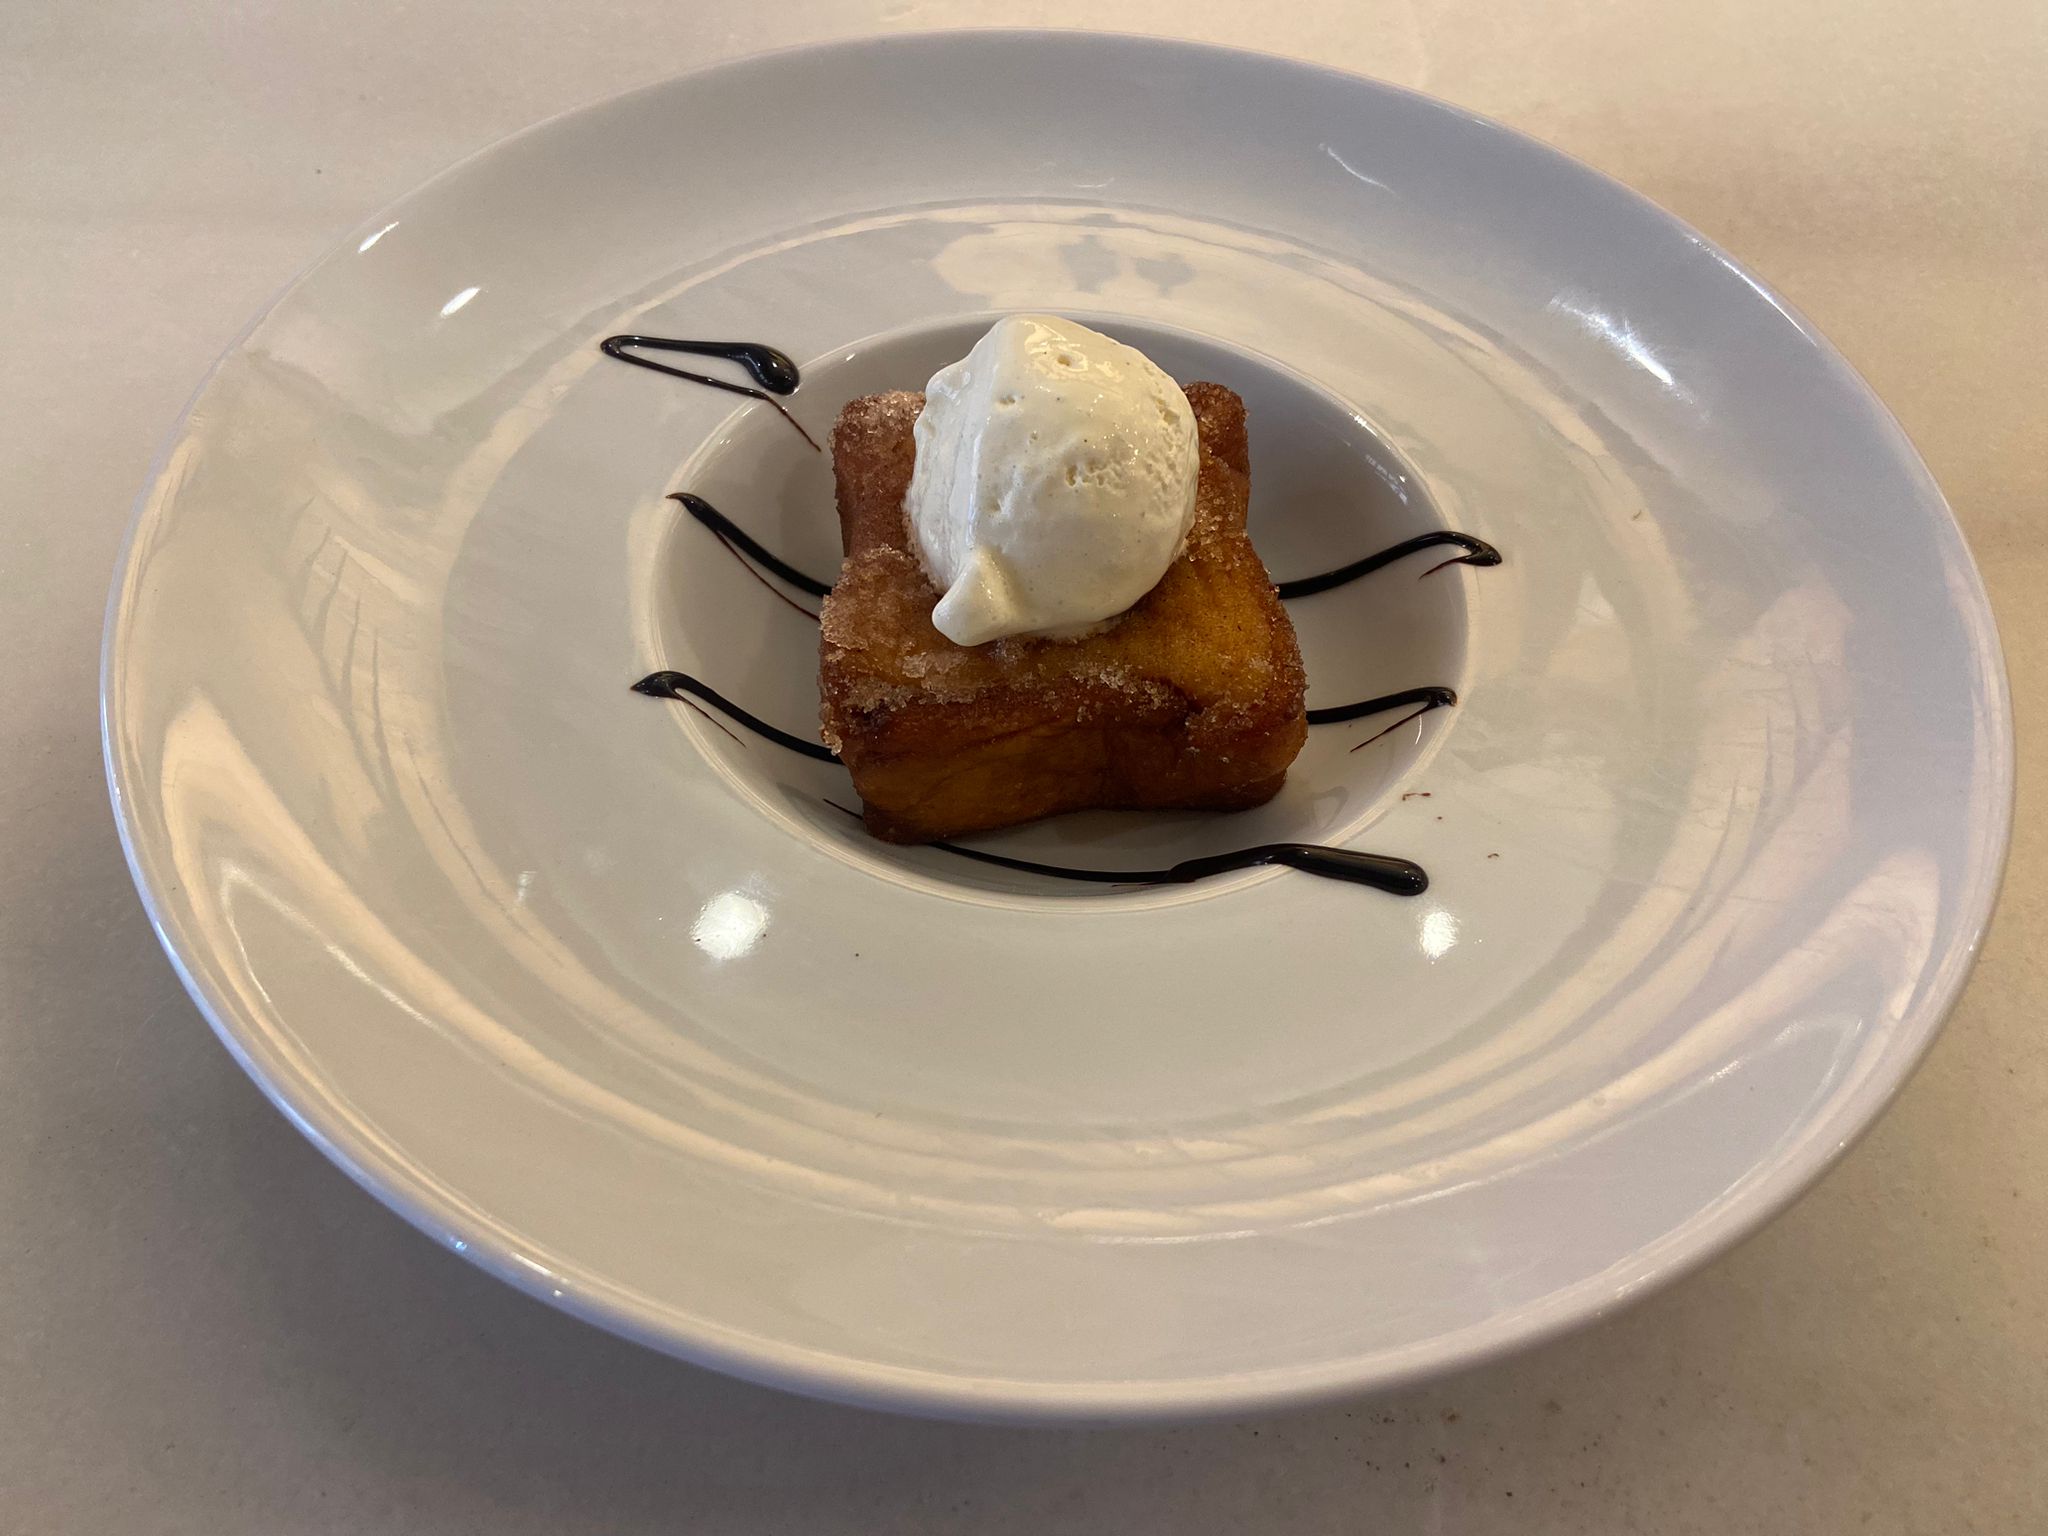 French toast ingot with biscuit cream